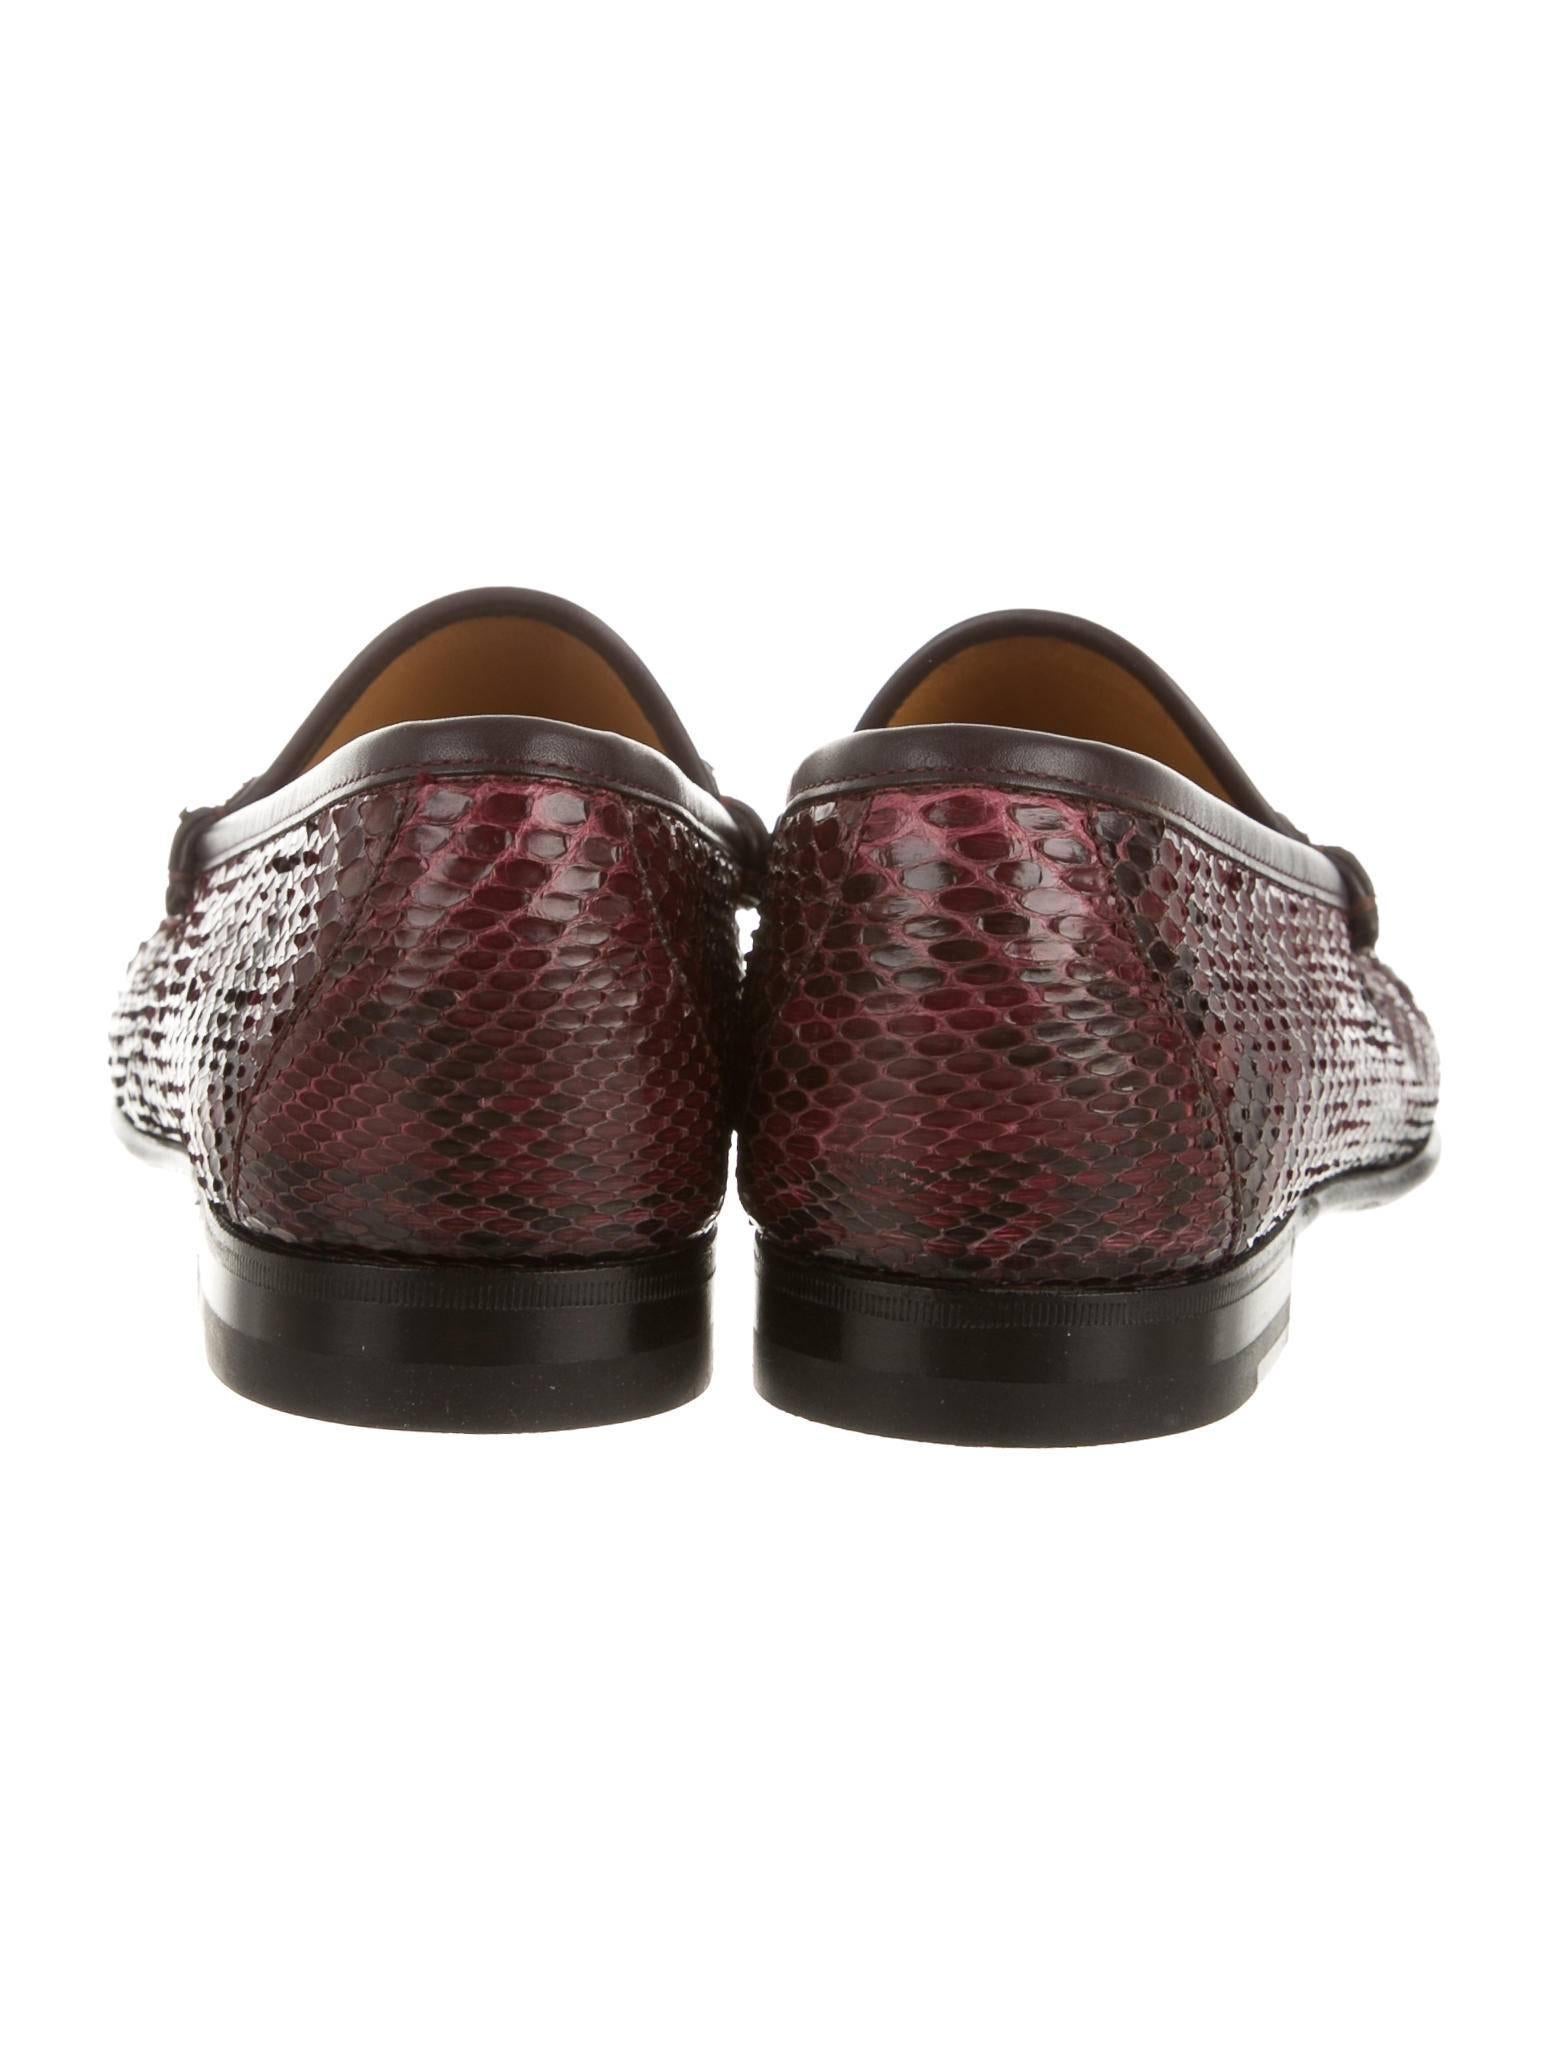 gucci snakeskin loafers